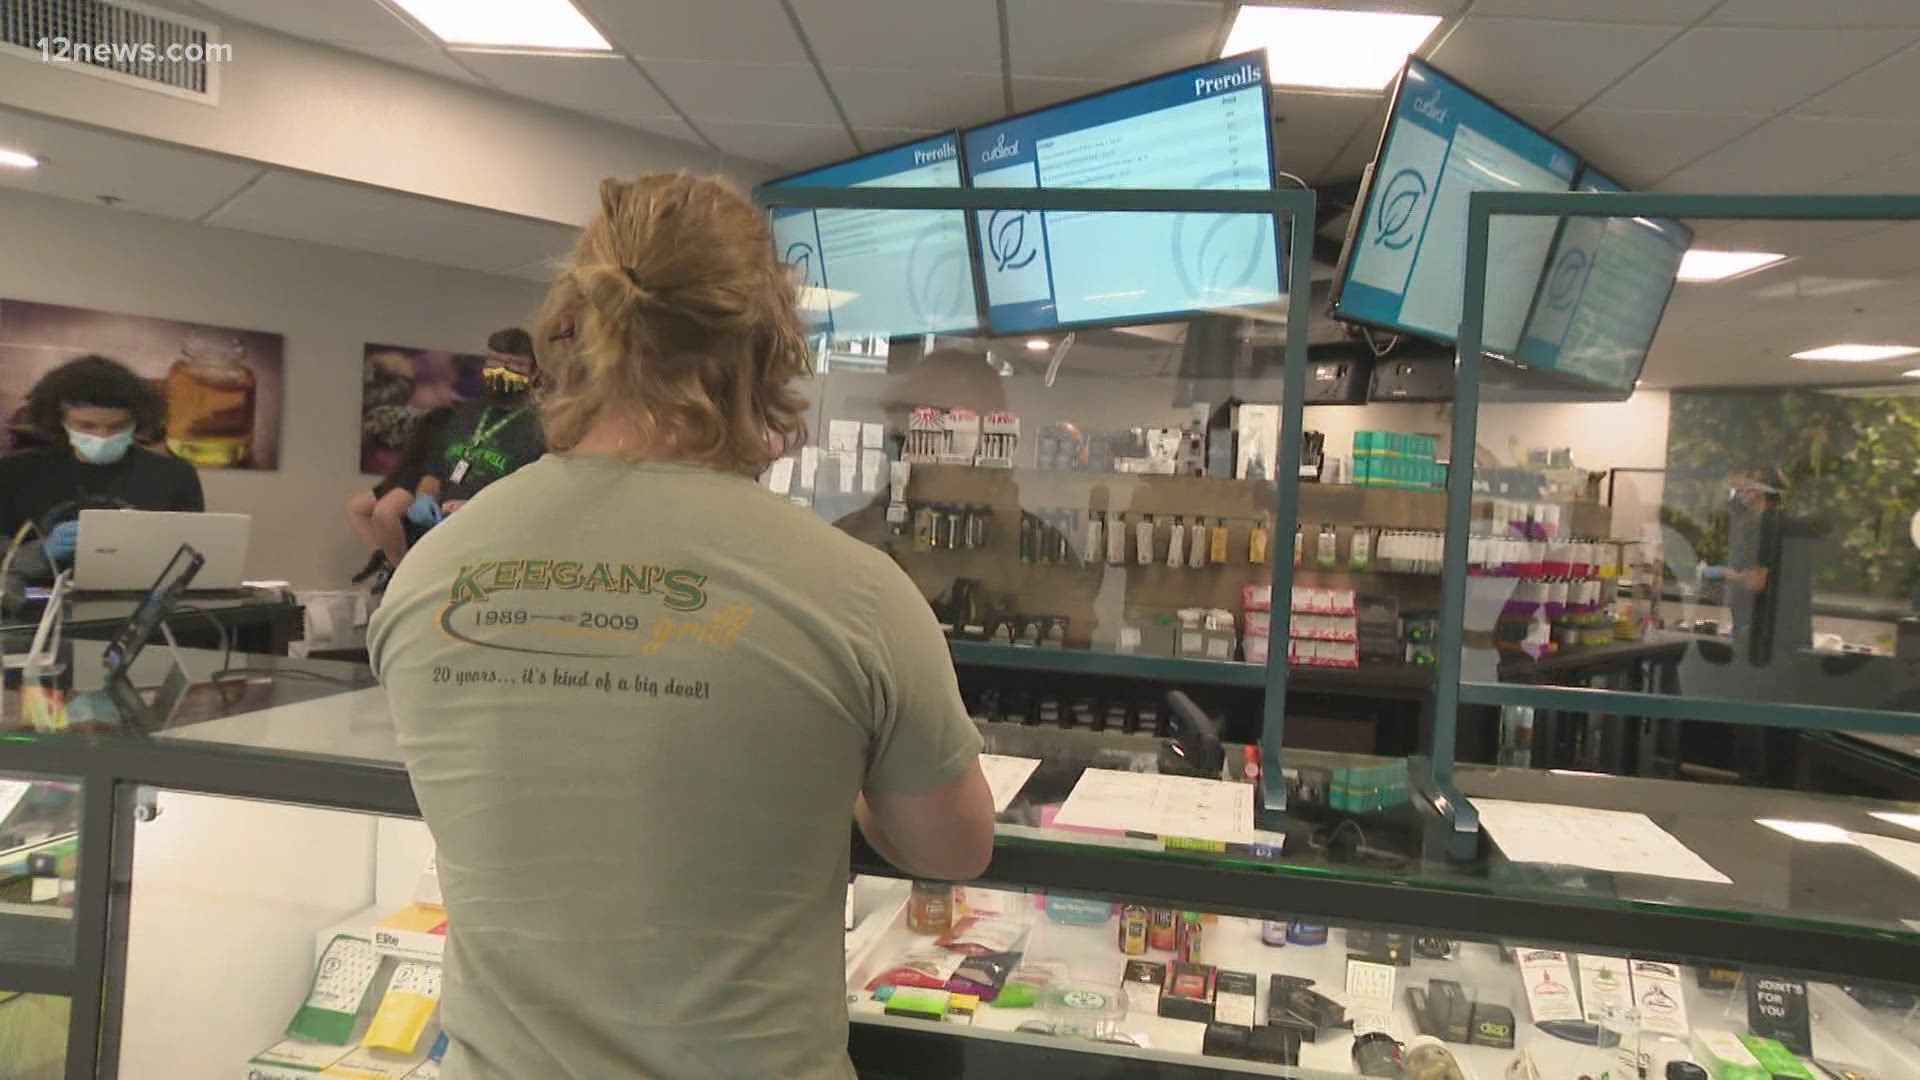 Crowds at dispensaries in downtown Phoenix gathered as they opened their doors for the first time to sell recreational marijuana.